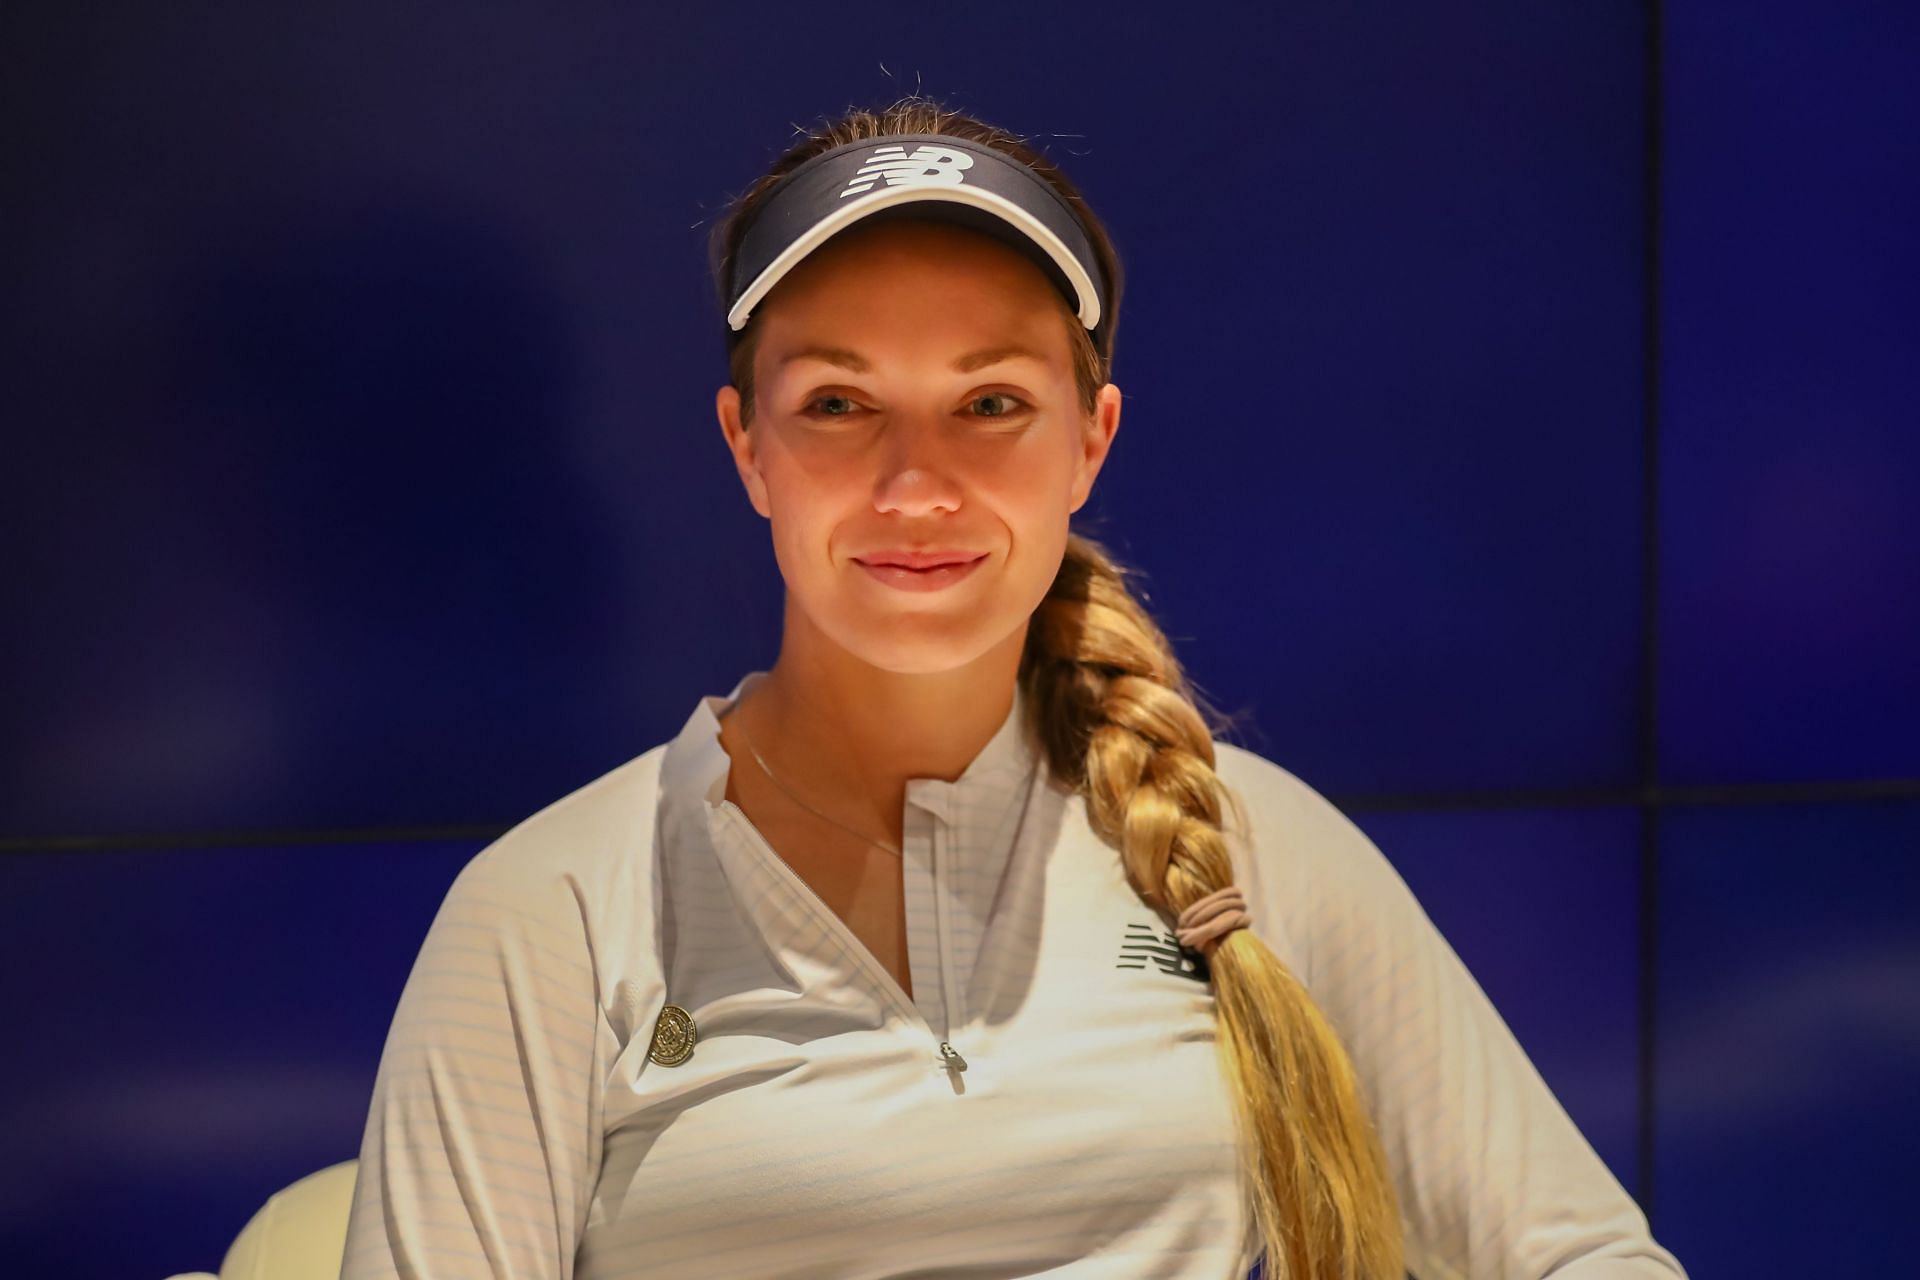 Danielle Collins is currently representing Team USA in the Billie Jean King Cup.